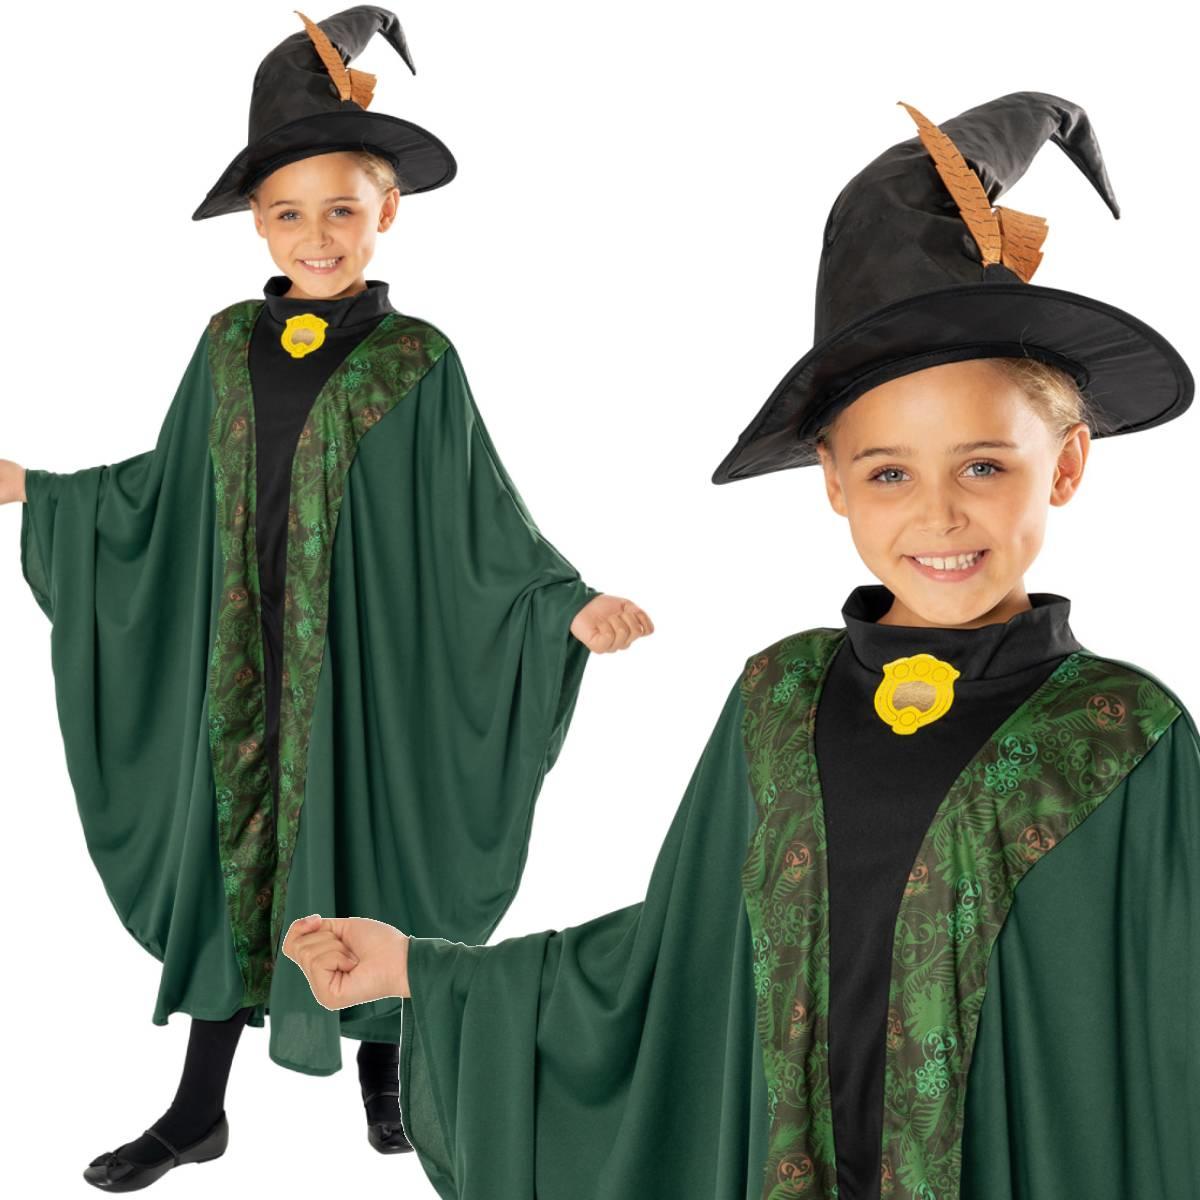 Hogwarts Professor McGonagall Fancy Dress Costume for Girls by Rubies 3009139 available here at Karnival Costumes online party shop